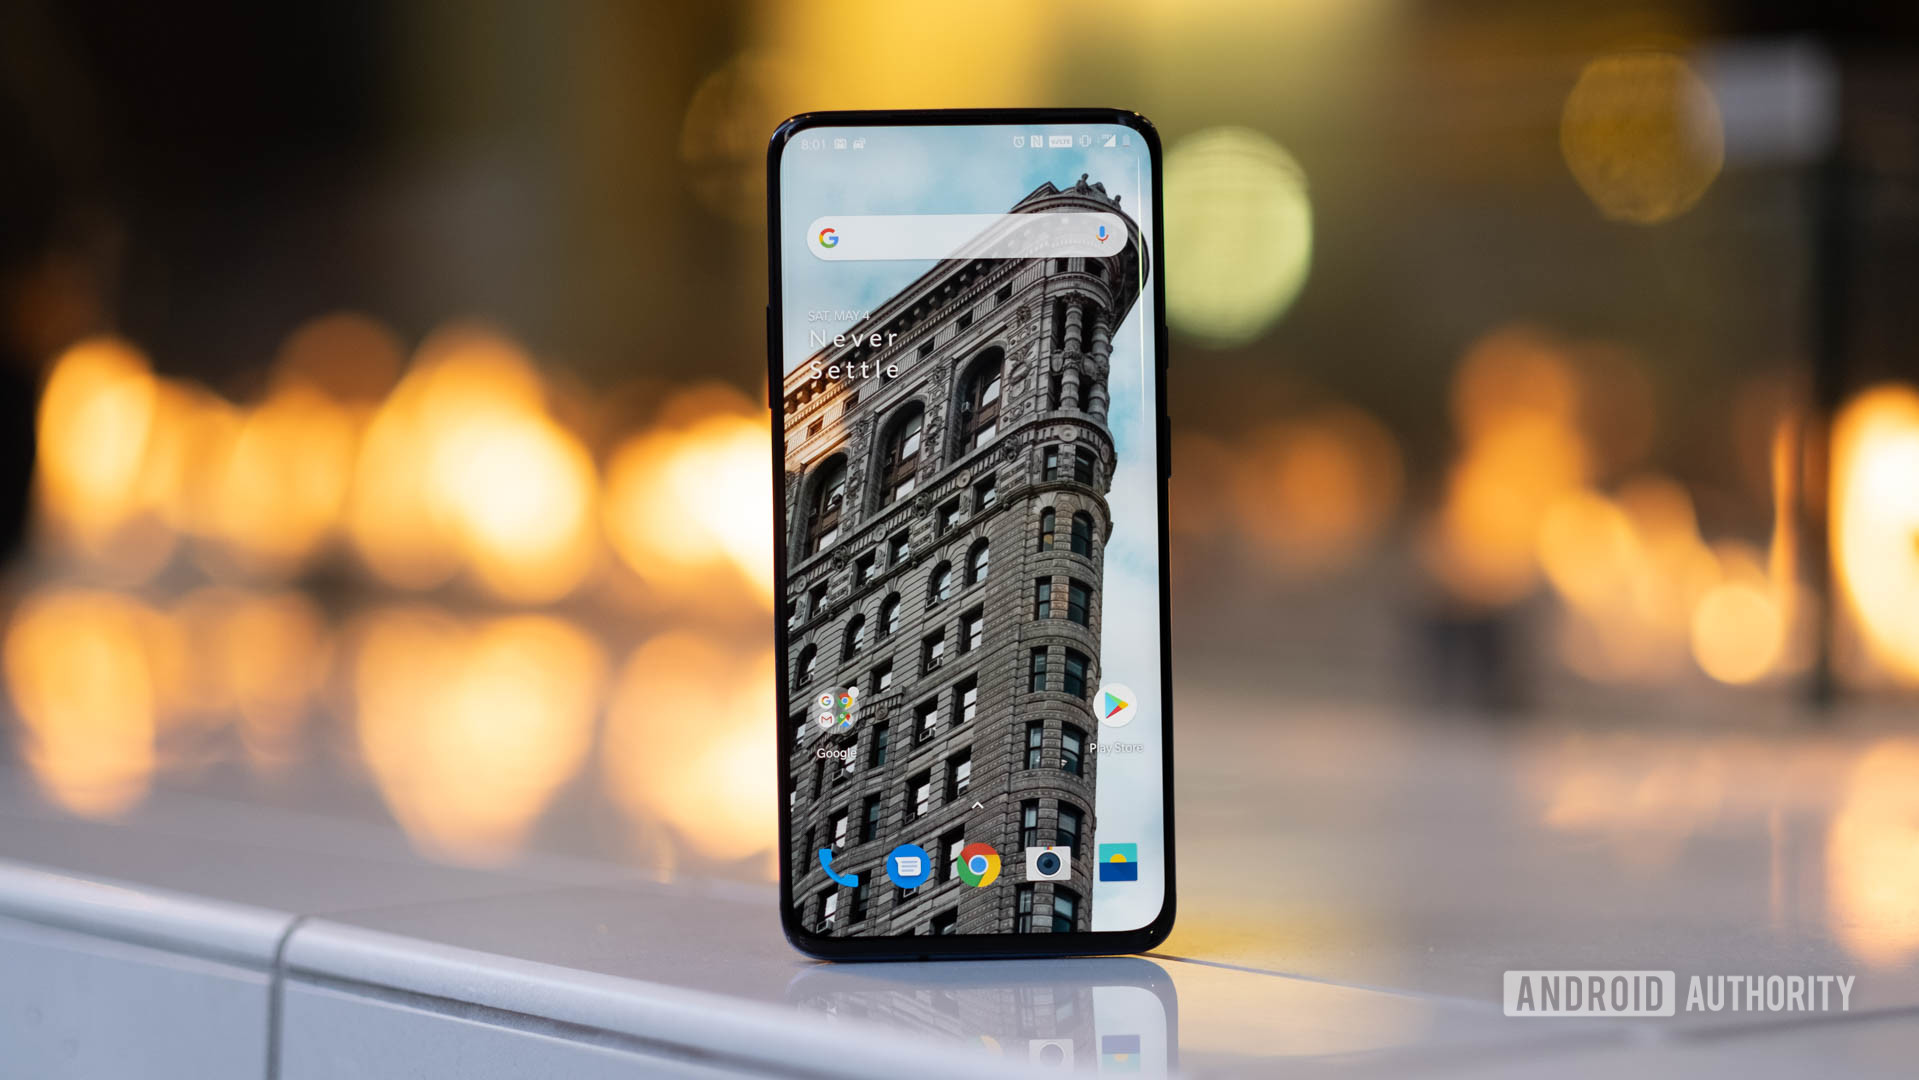 OnePlus 7 Pro screen in front of fire